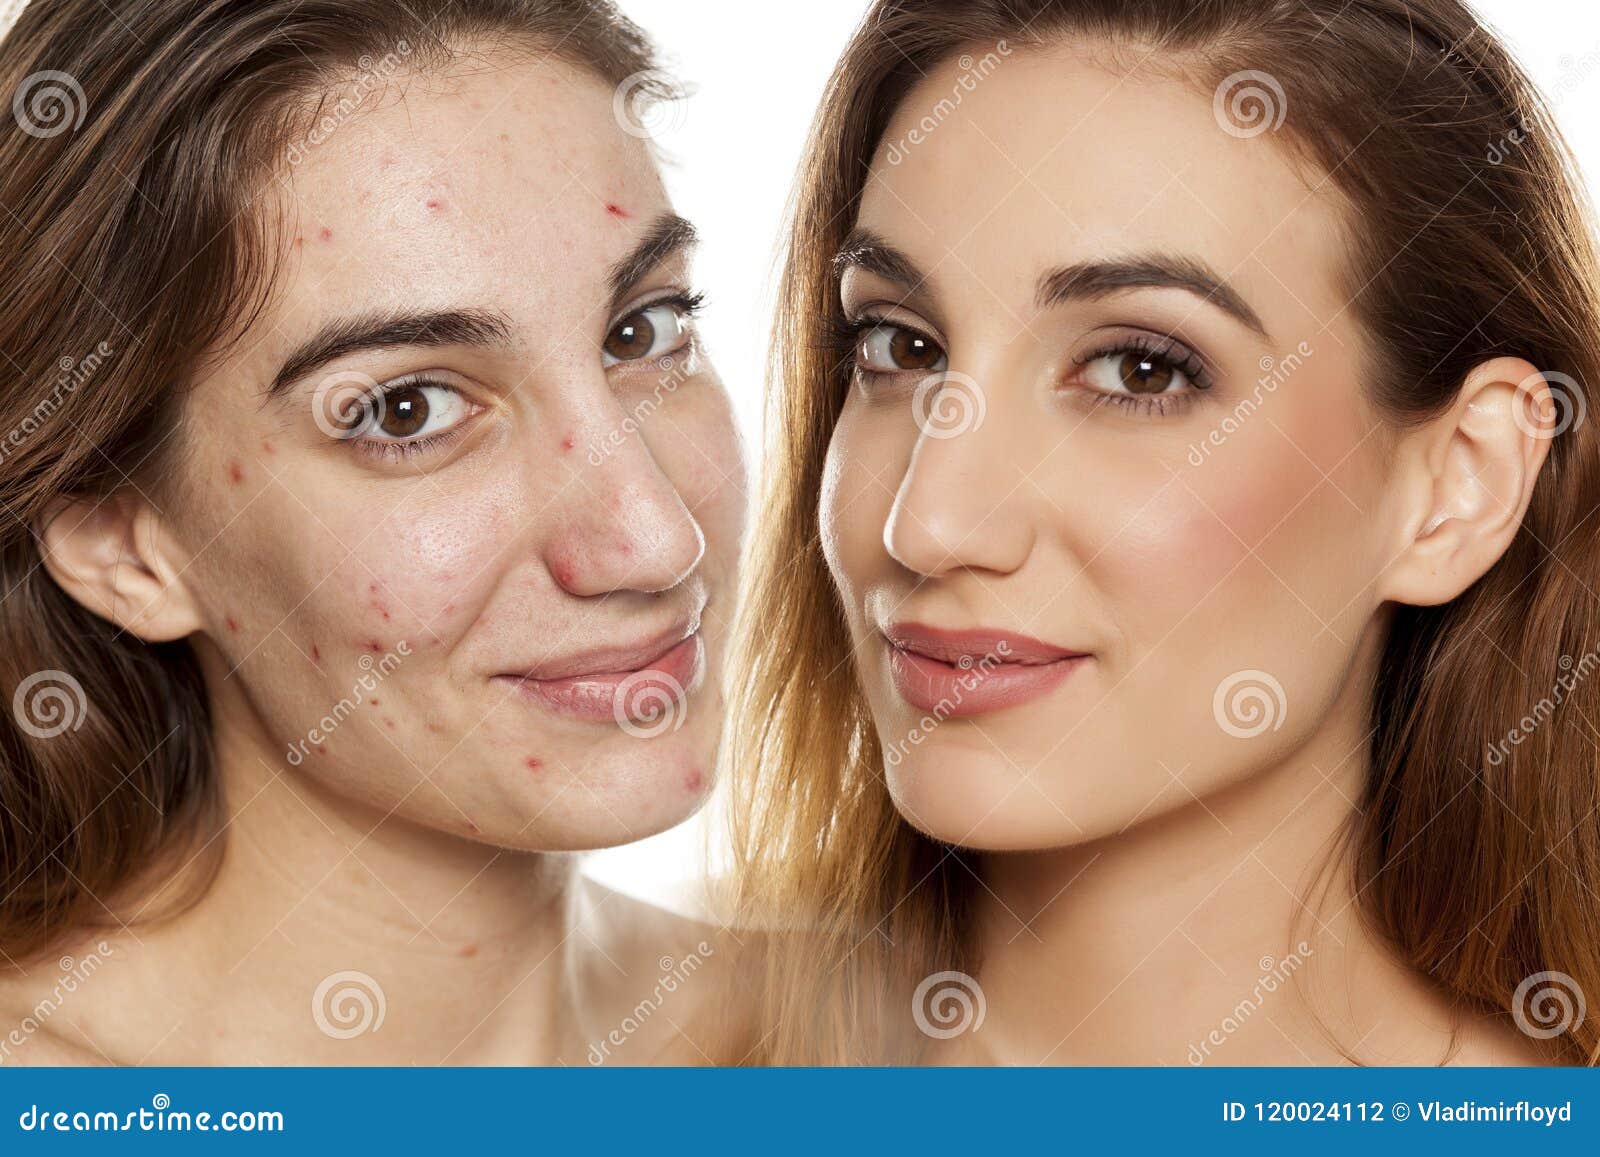 Before and after make up stock photo. Image of beautiful - 120024112